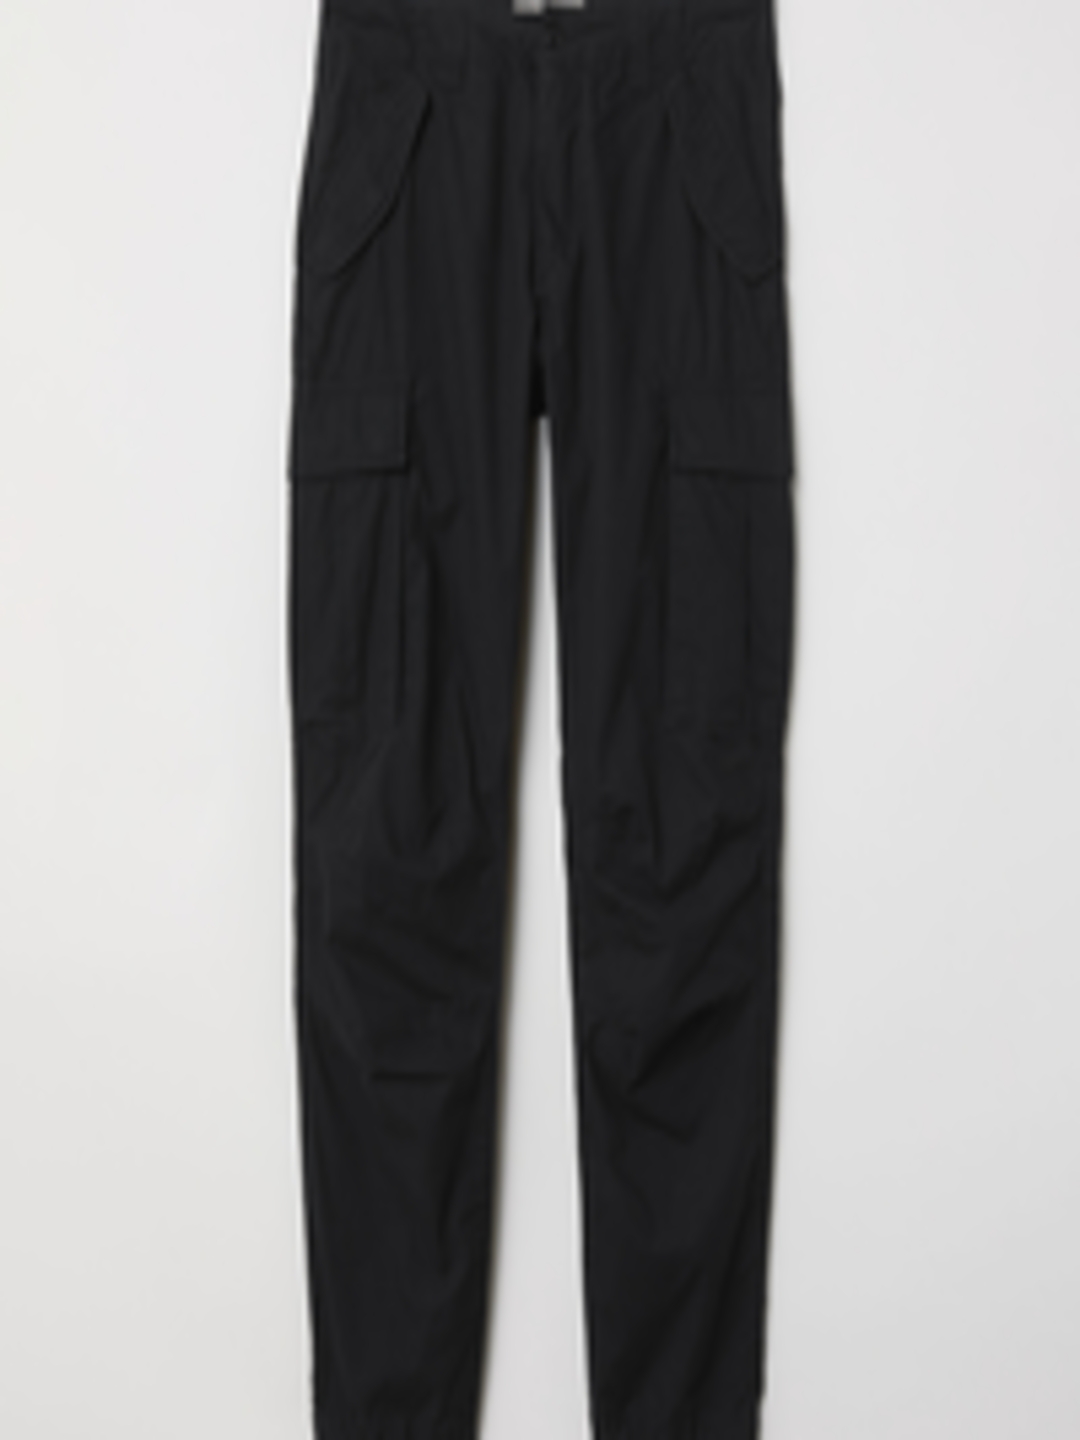 Buy H&M Men Black Solid Cargo Trousers - Trousers for Men 10386935 | Myntra